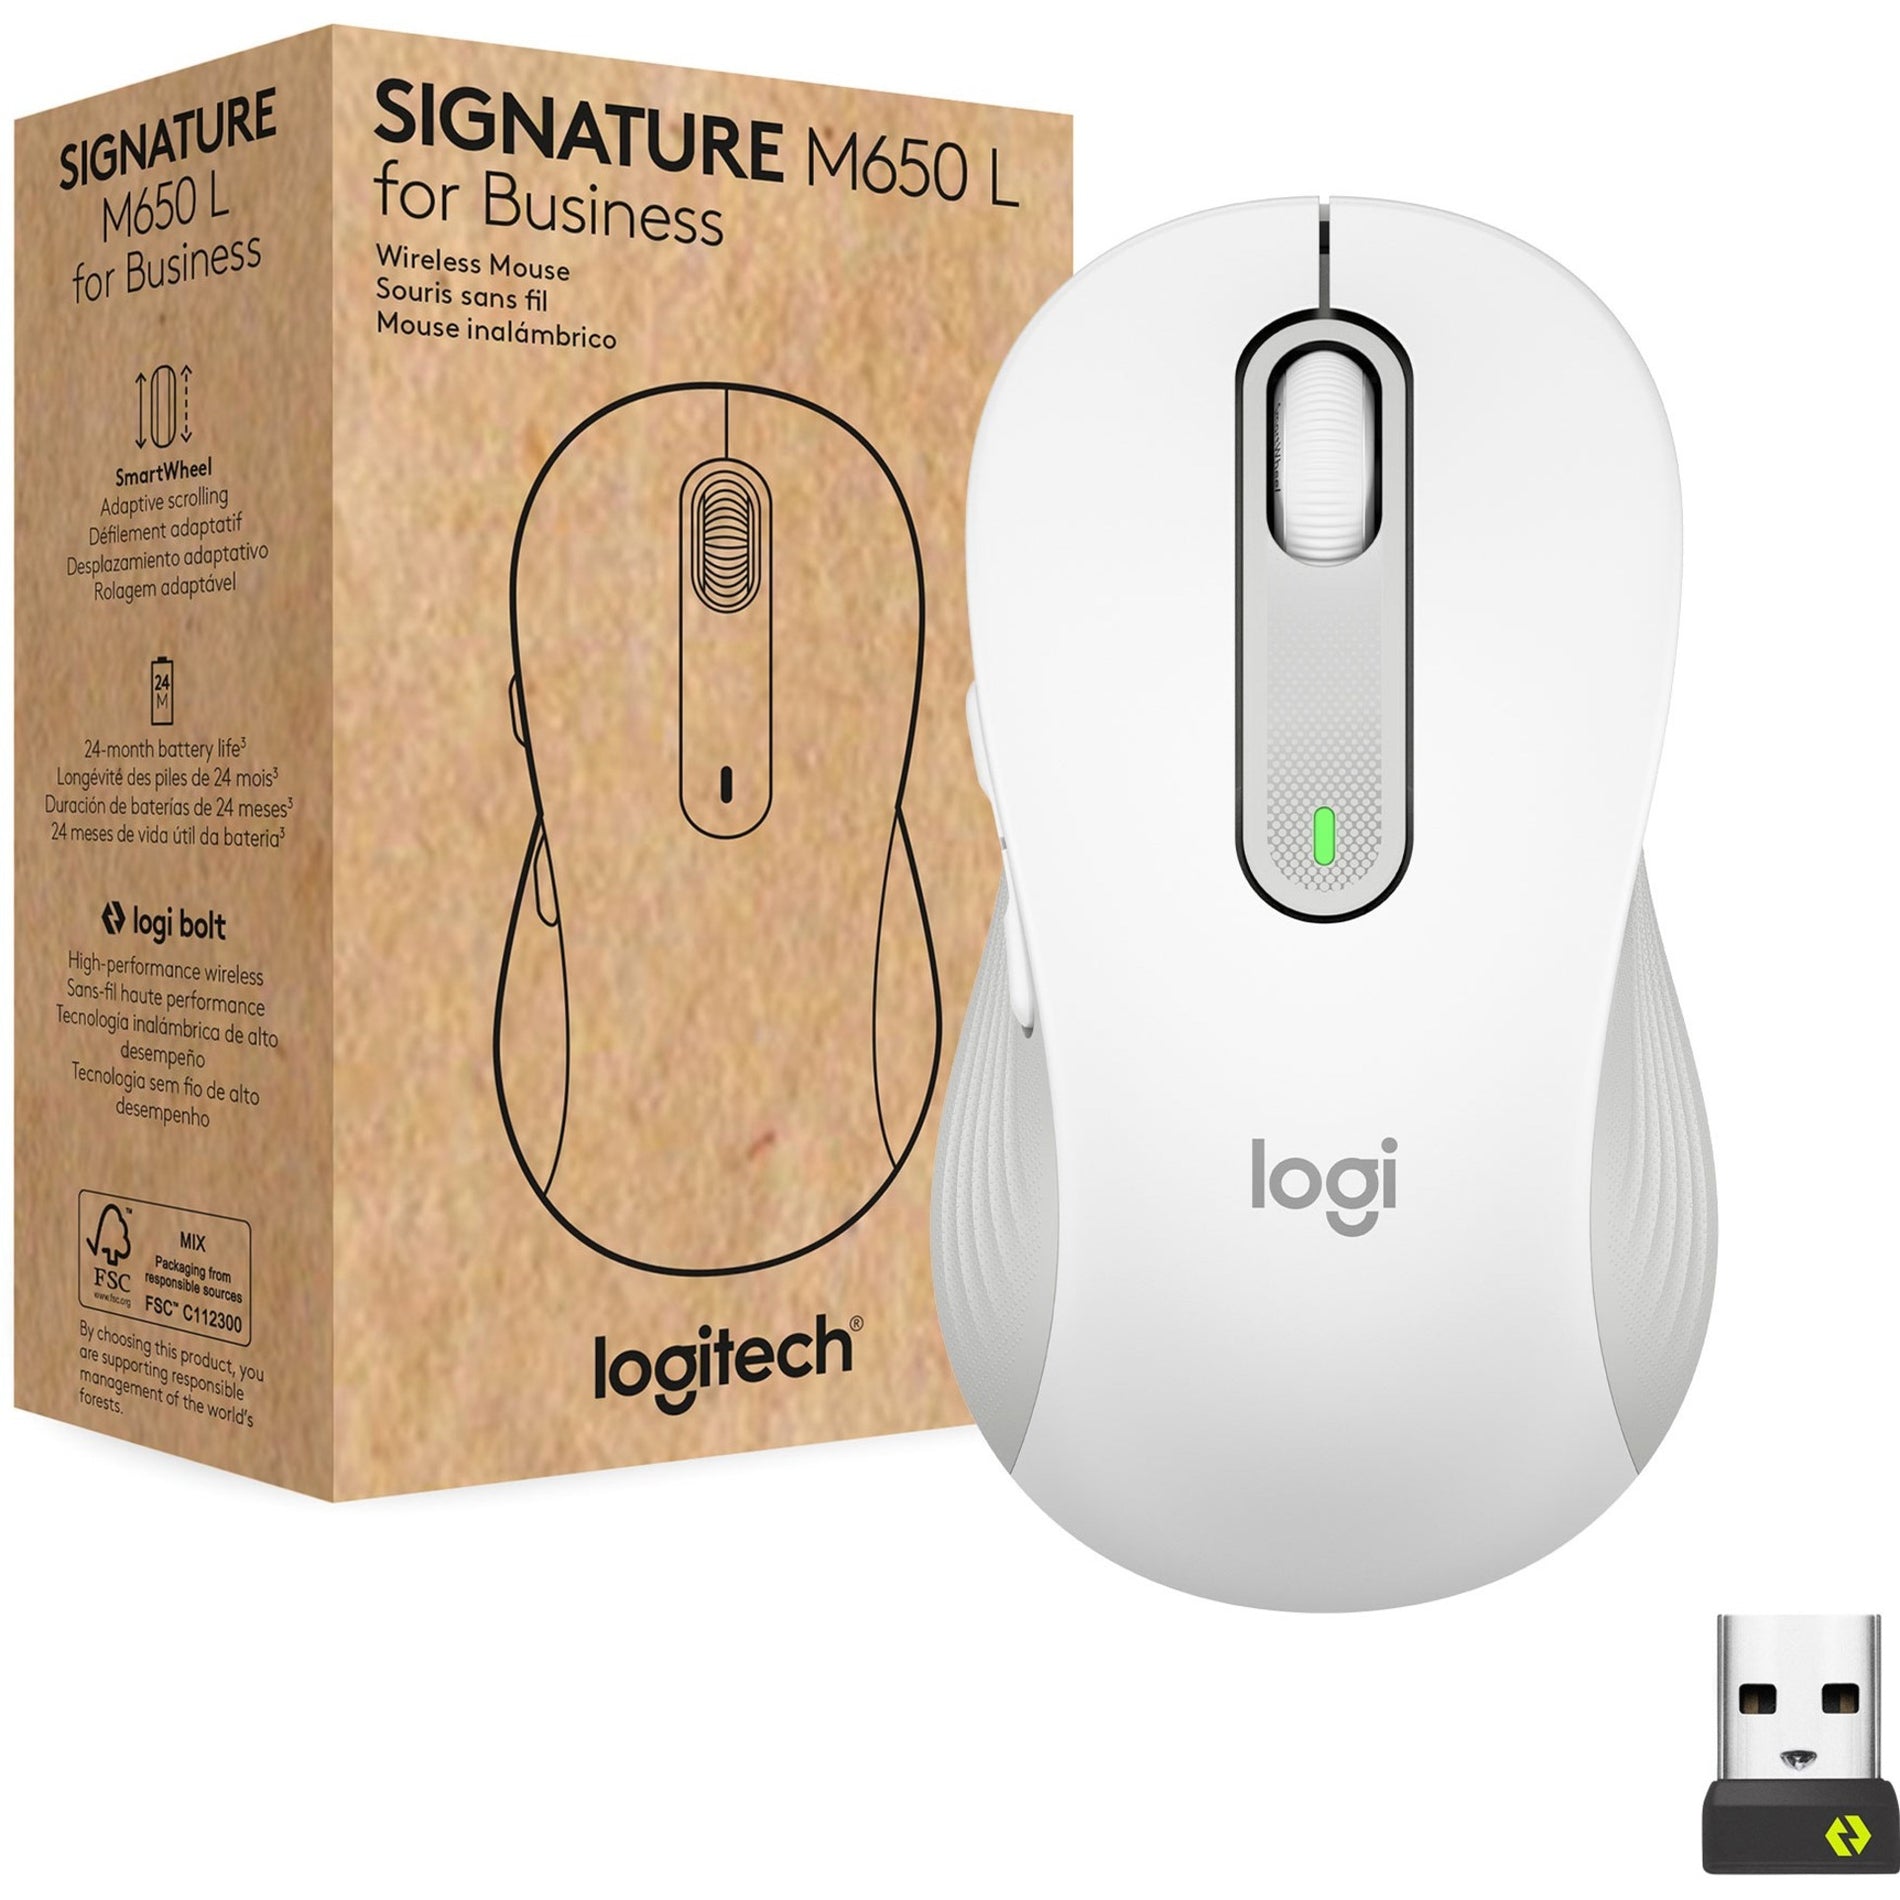 Logitech 910-006273 Signature M650 Mouse, Wireless Bluetooth/Radio Frequency, Off White